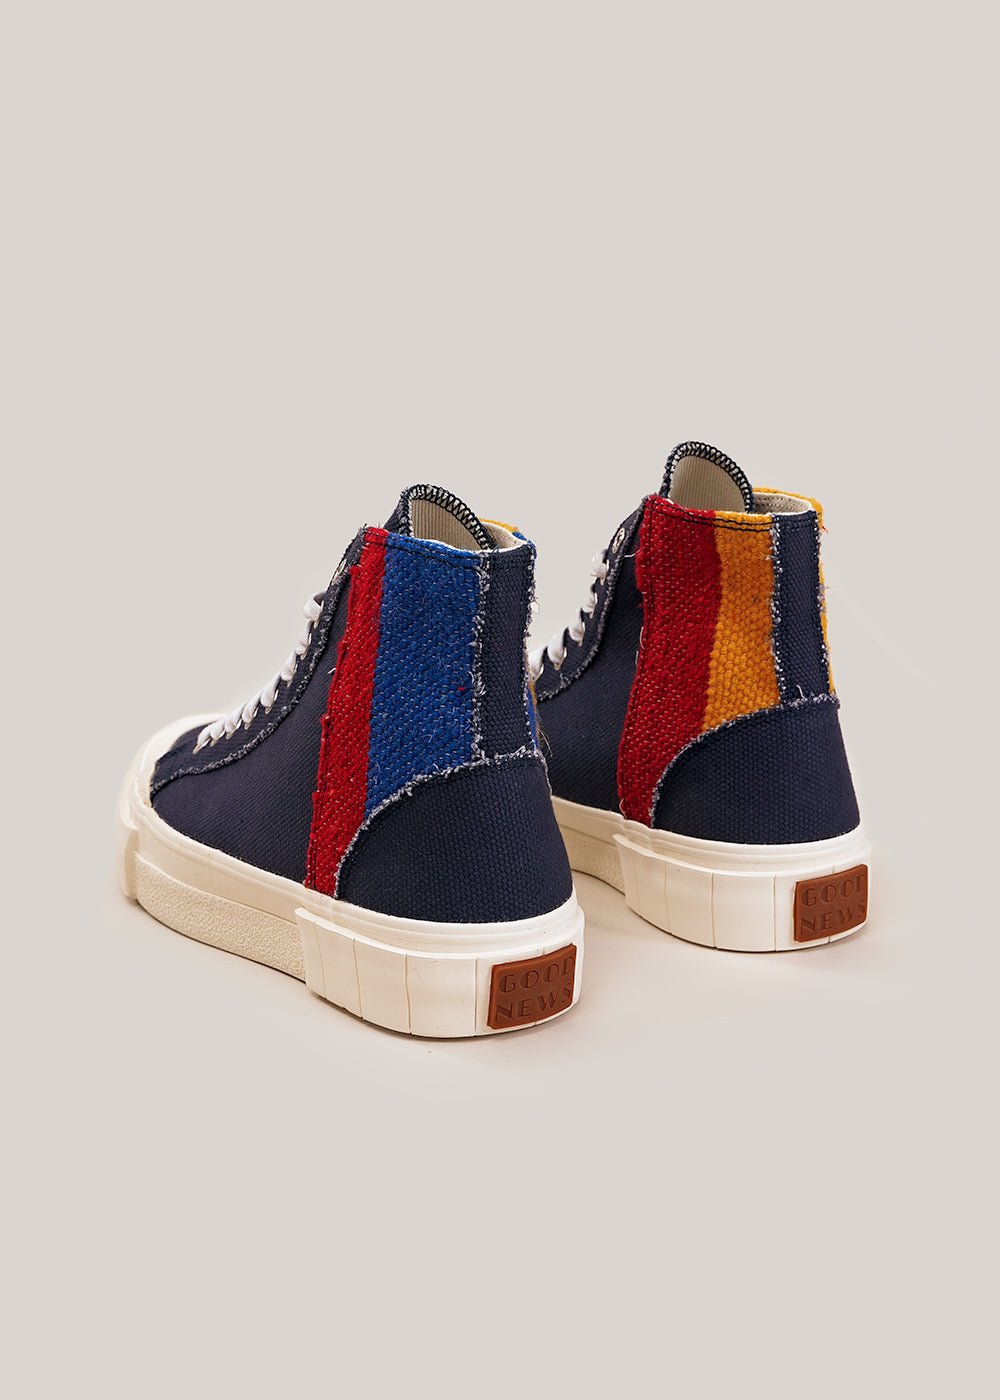 GOOD NEWS Navy Palm Moroccan Sneakers - New Classics Studios Sustainable Ethical Fashion Canada